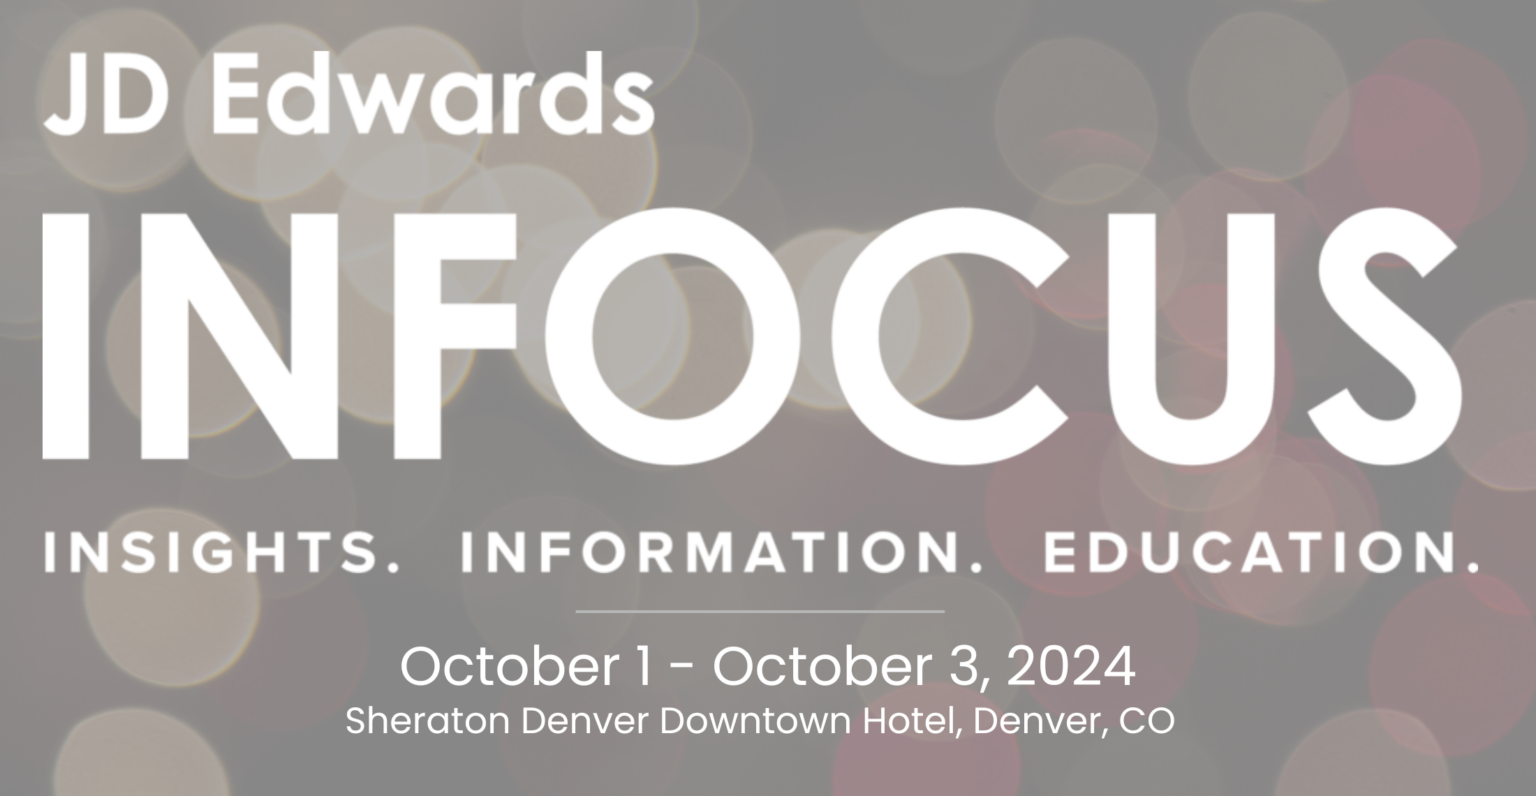 Picture with information about the event Infocus 2024 in Denver, Colorado.